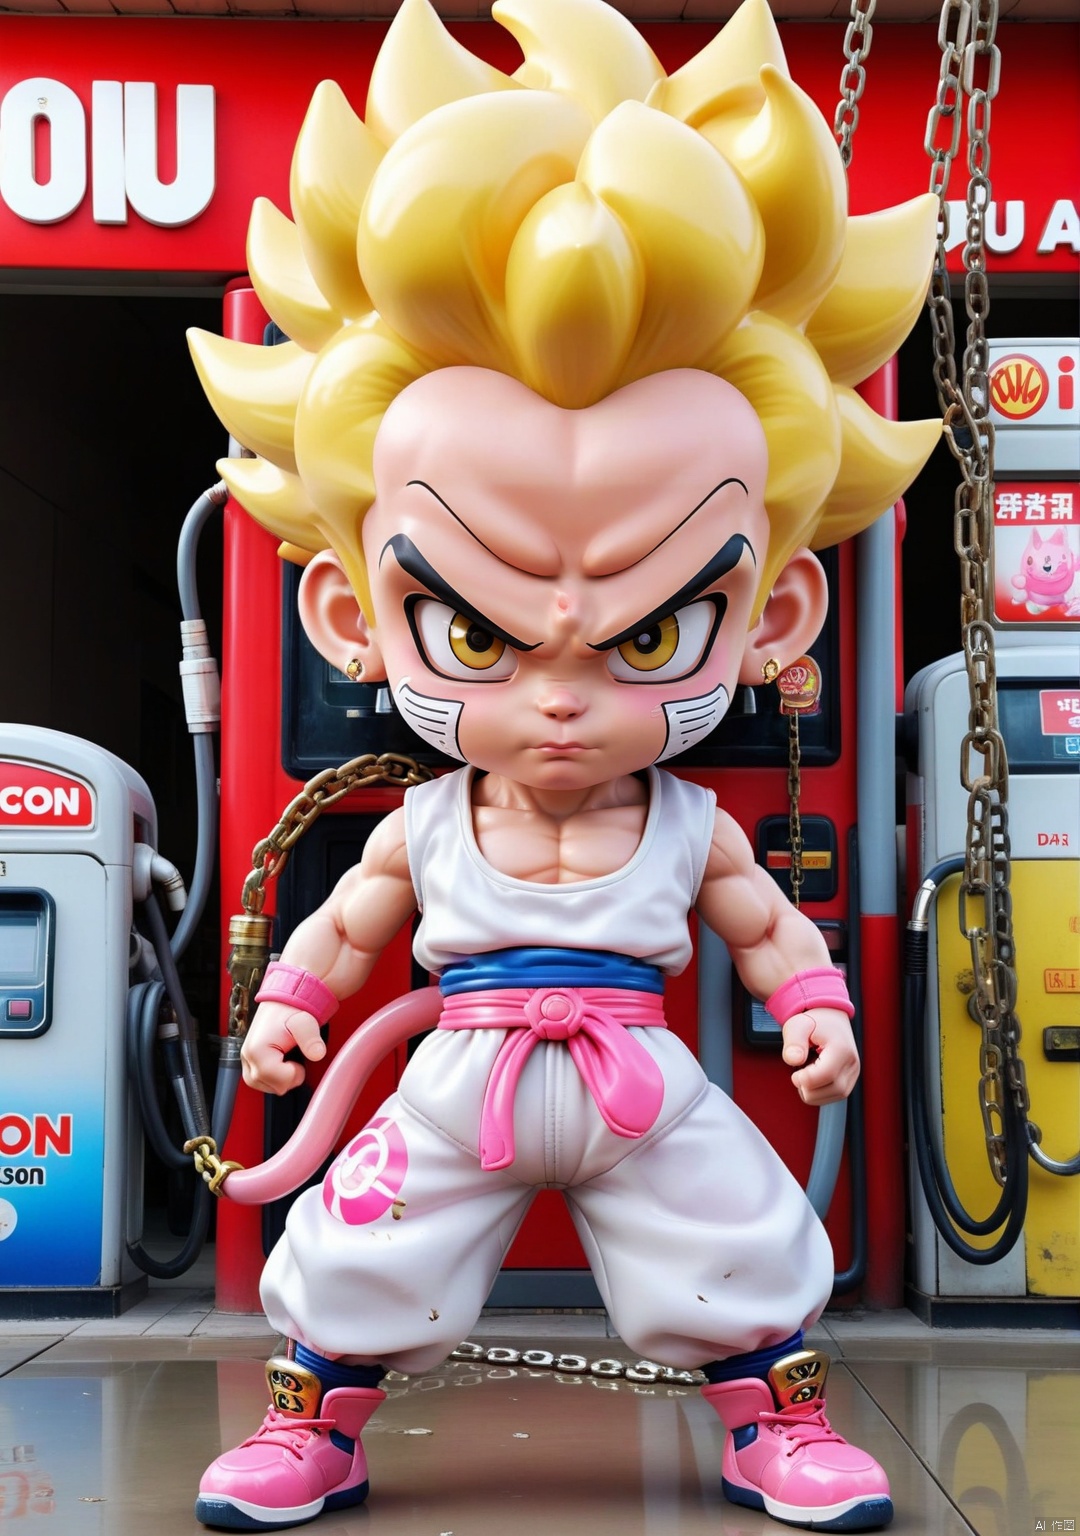 3DIP,PEIQI,(wsoiran:1.1),masterpiece,best quality,masterpiece,and textures with precision),super buu son gohan,light skin,In the style of Paranormal,dilapidated gas station,Chilling rattling chains,(Frown) looking at viewer, 3DIP